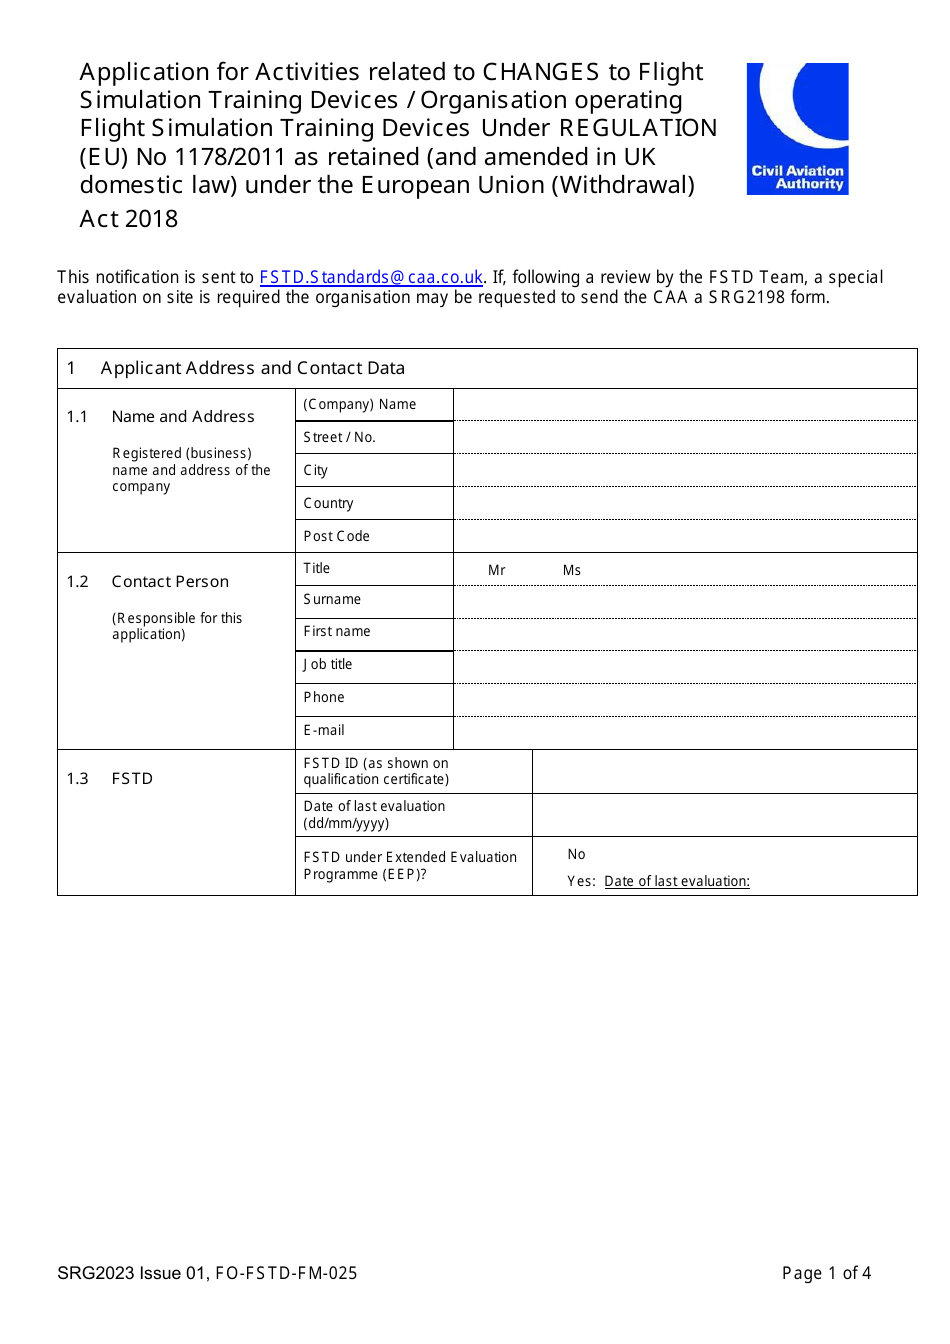 Form SRG2023 Application for Activities Related to Changes to Flight Simulation Training Devices/Organisation Operating Flight Simulation Training Devices Under Regulation (Eu) No 1178/2011 as Retained (And Amended in UK Domestic Law) Under the European Union (Withdrawal) Act 2018 - United Kingdom, Page 1